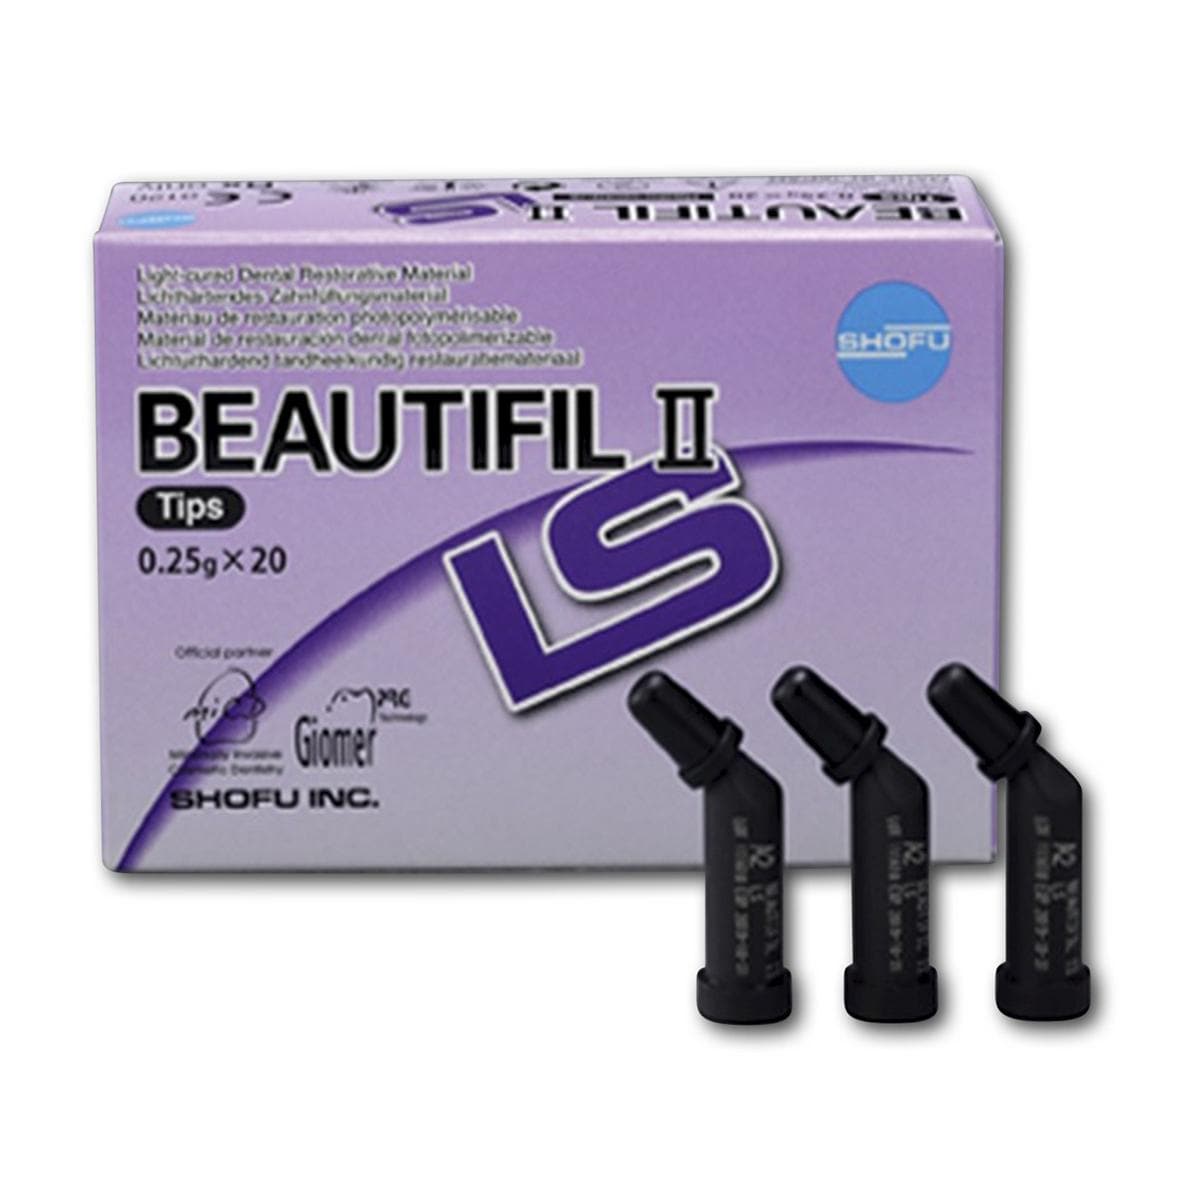 Beautifil II LS - embouts - A3, embouts 20 x 0,25 g